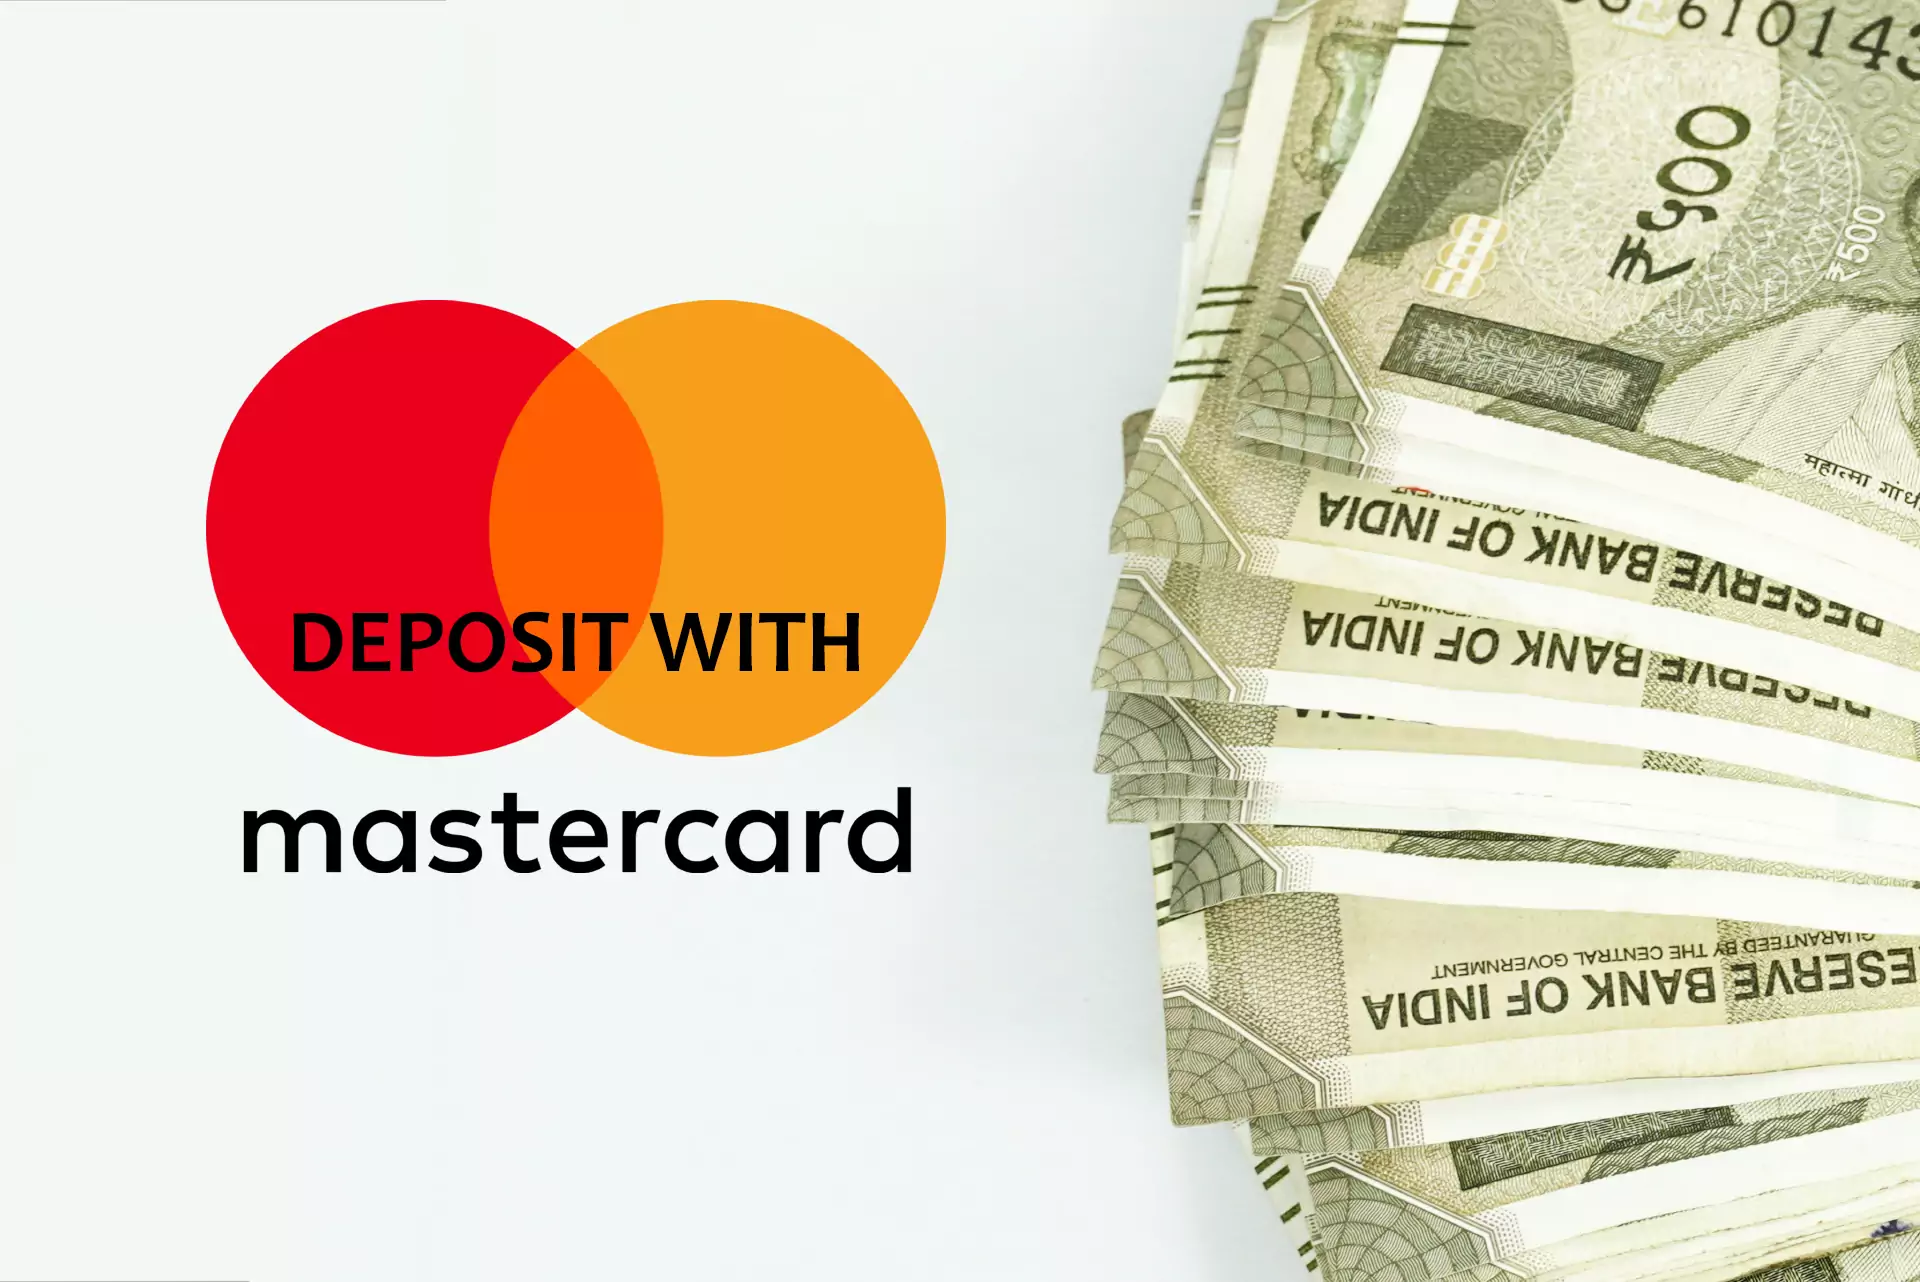 Deposit operations with MasterCard take less than a minute.